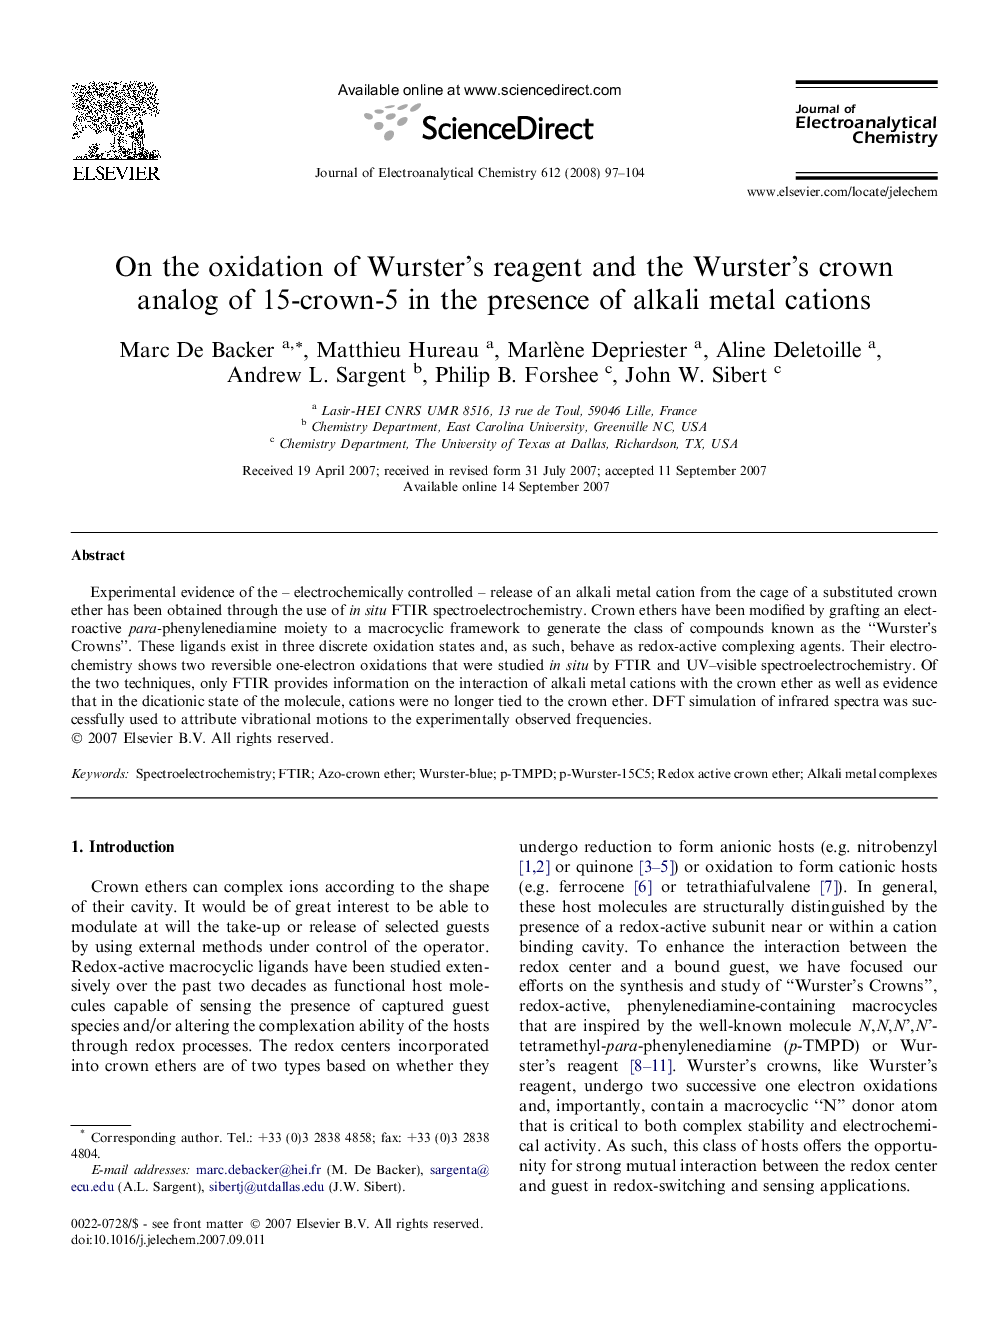 On the oxidation of Wurster’s reagent and the Wurster’s crown analog of 15-crown-5 in the presence of alkali metal cations